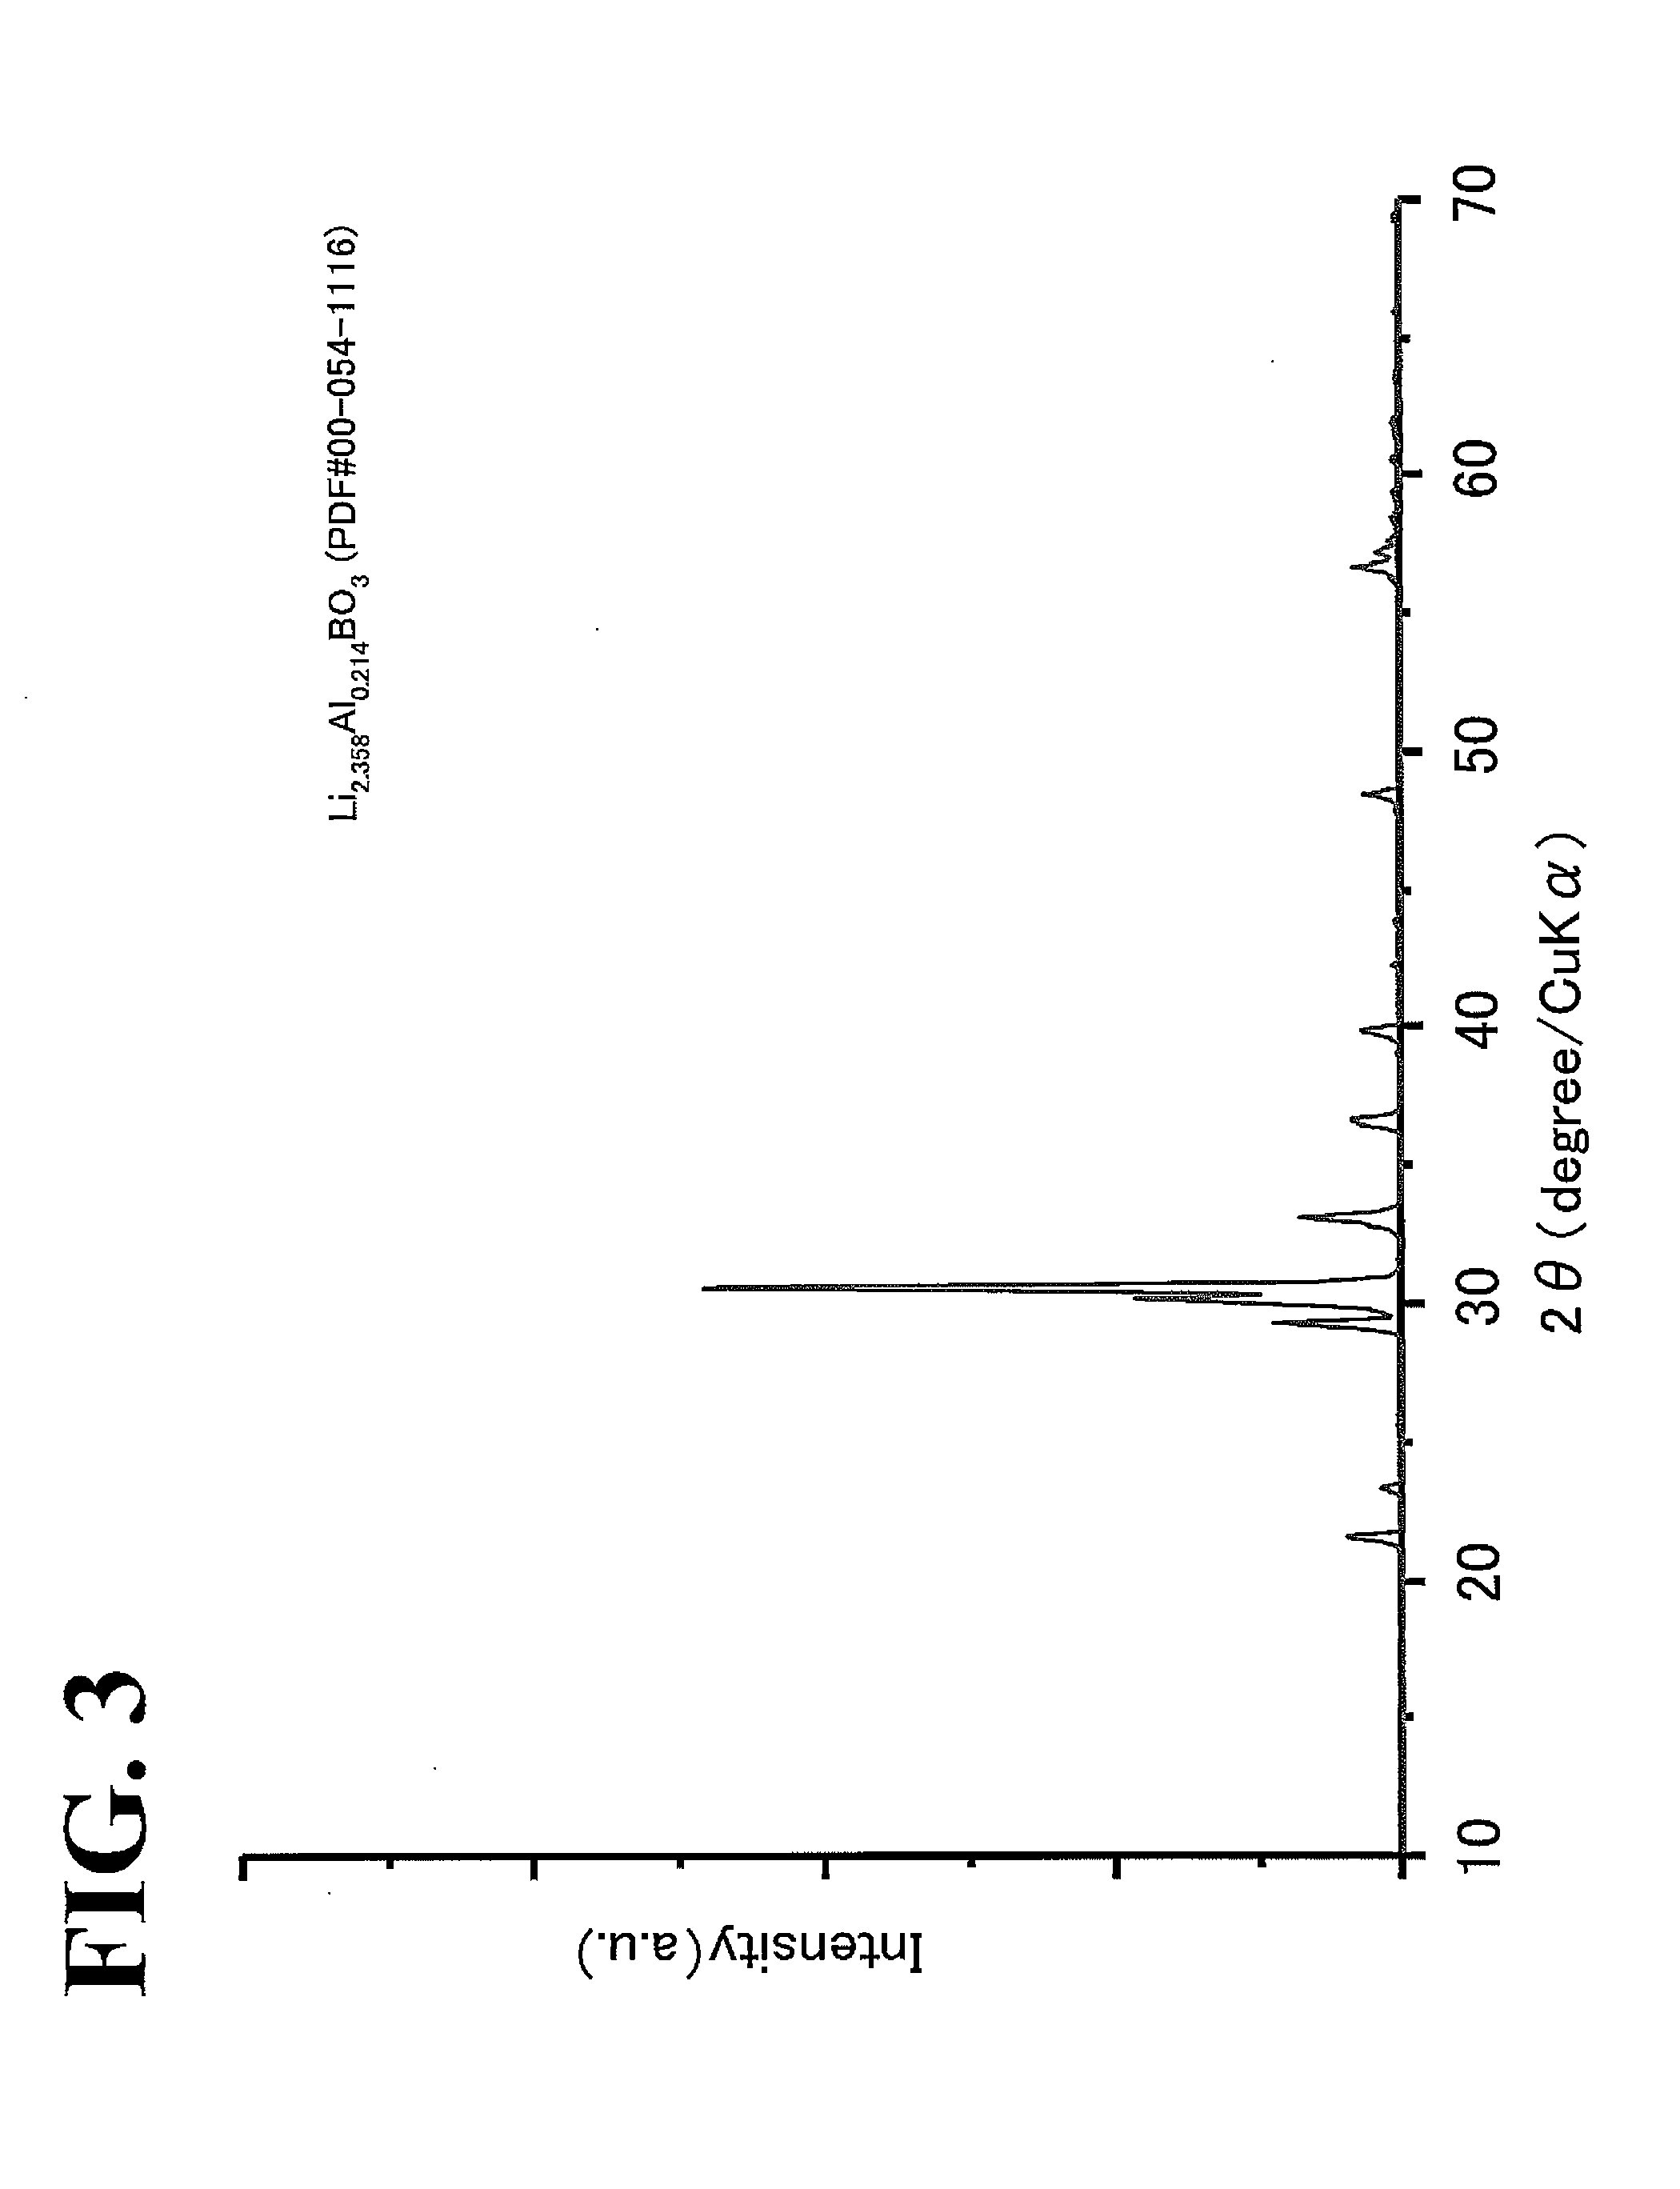 All-solid-state lithium secondary battery and method for producing the same